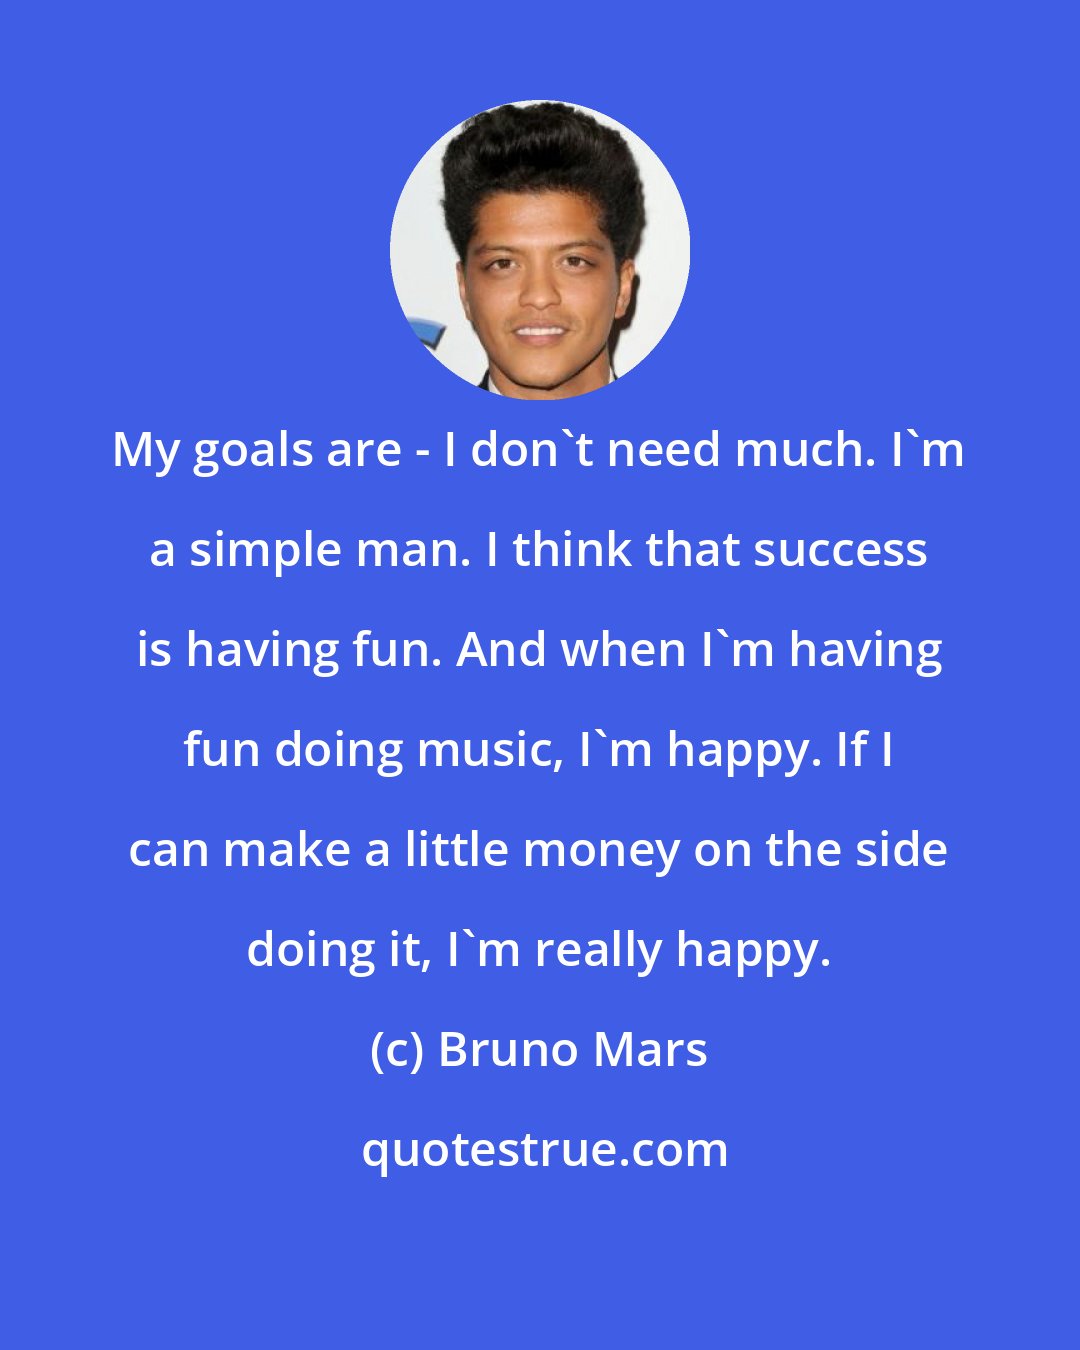 Bruno Mars: My goals are - I don't need much. I'm a simple man. I think that success is having fun. And when I'm having fun doing music, I'm happy. If I can make a little money on the side doing it, I'm really happy.